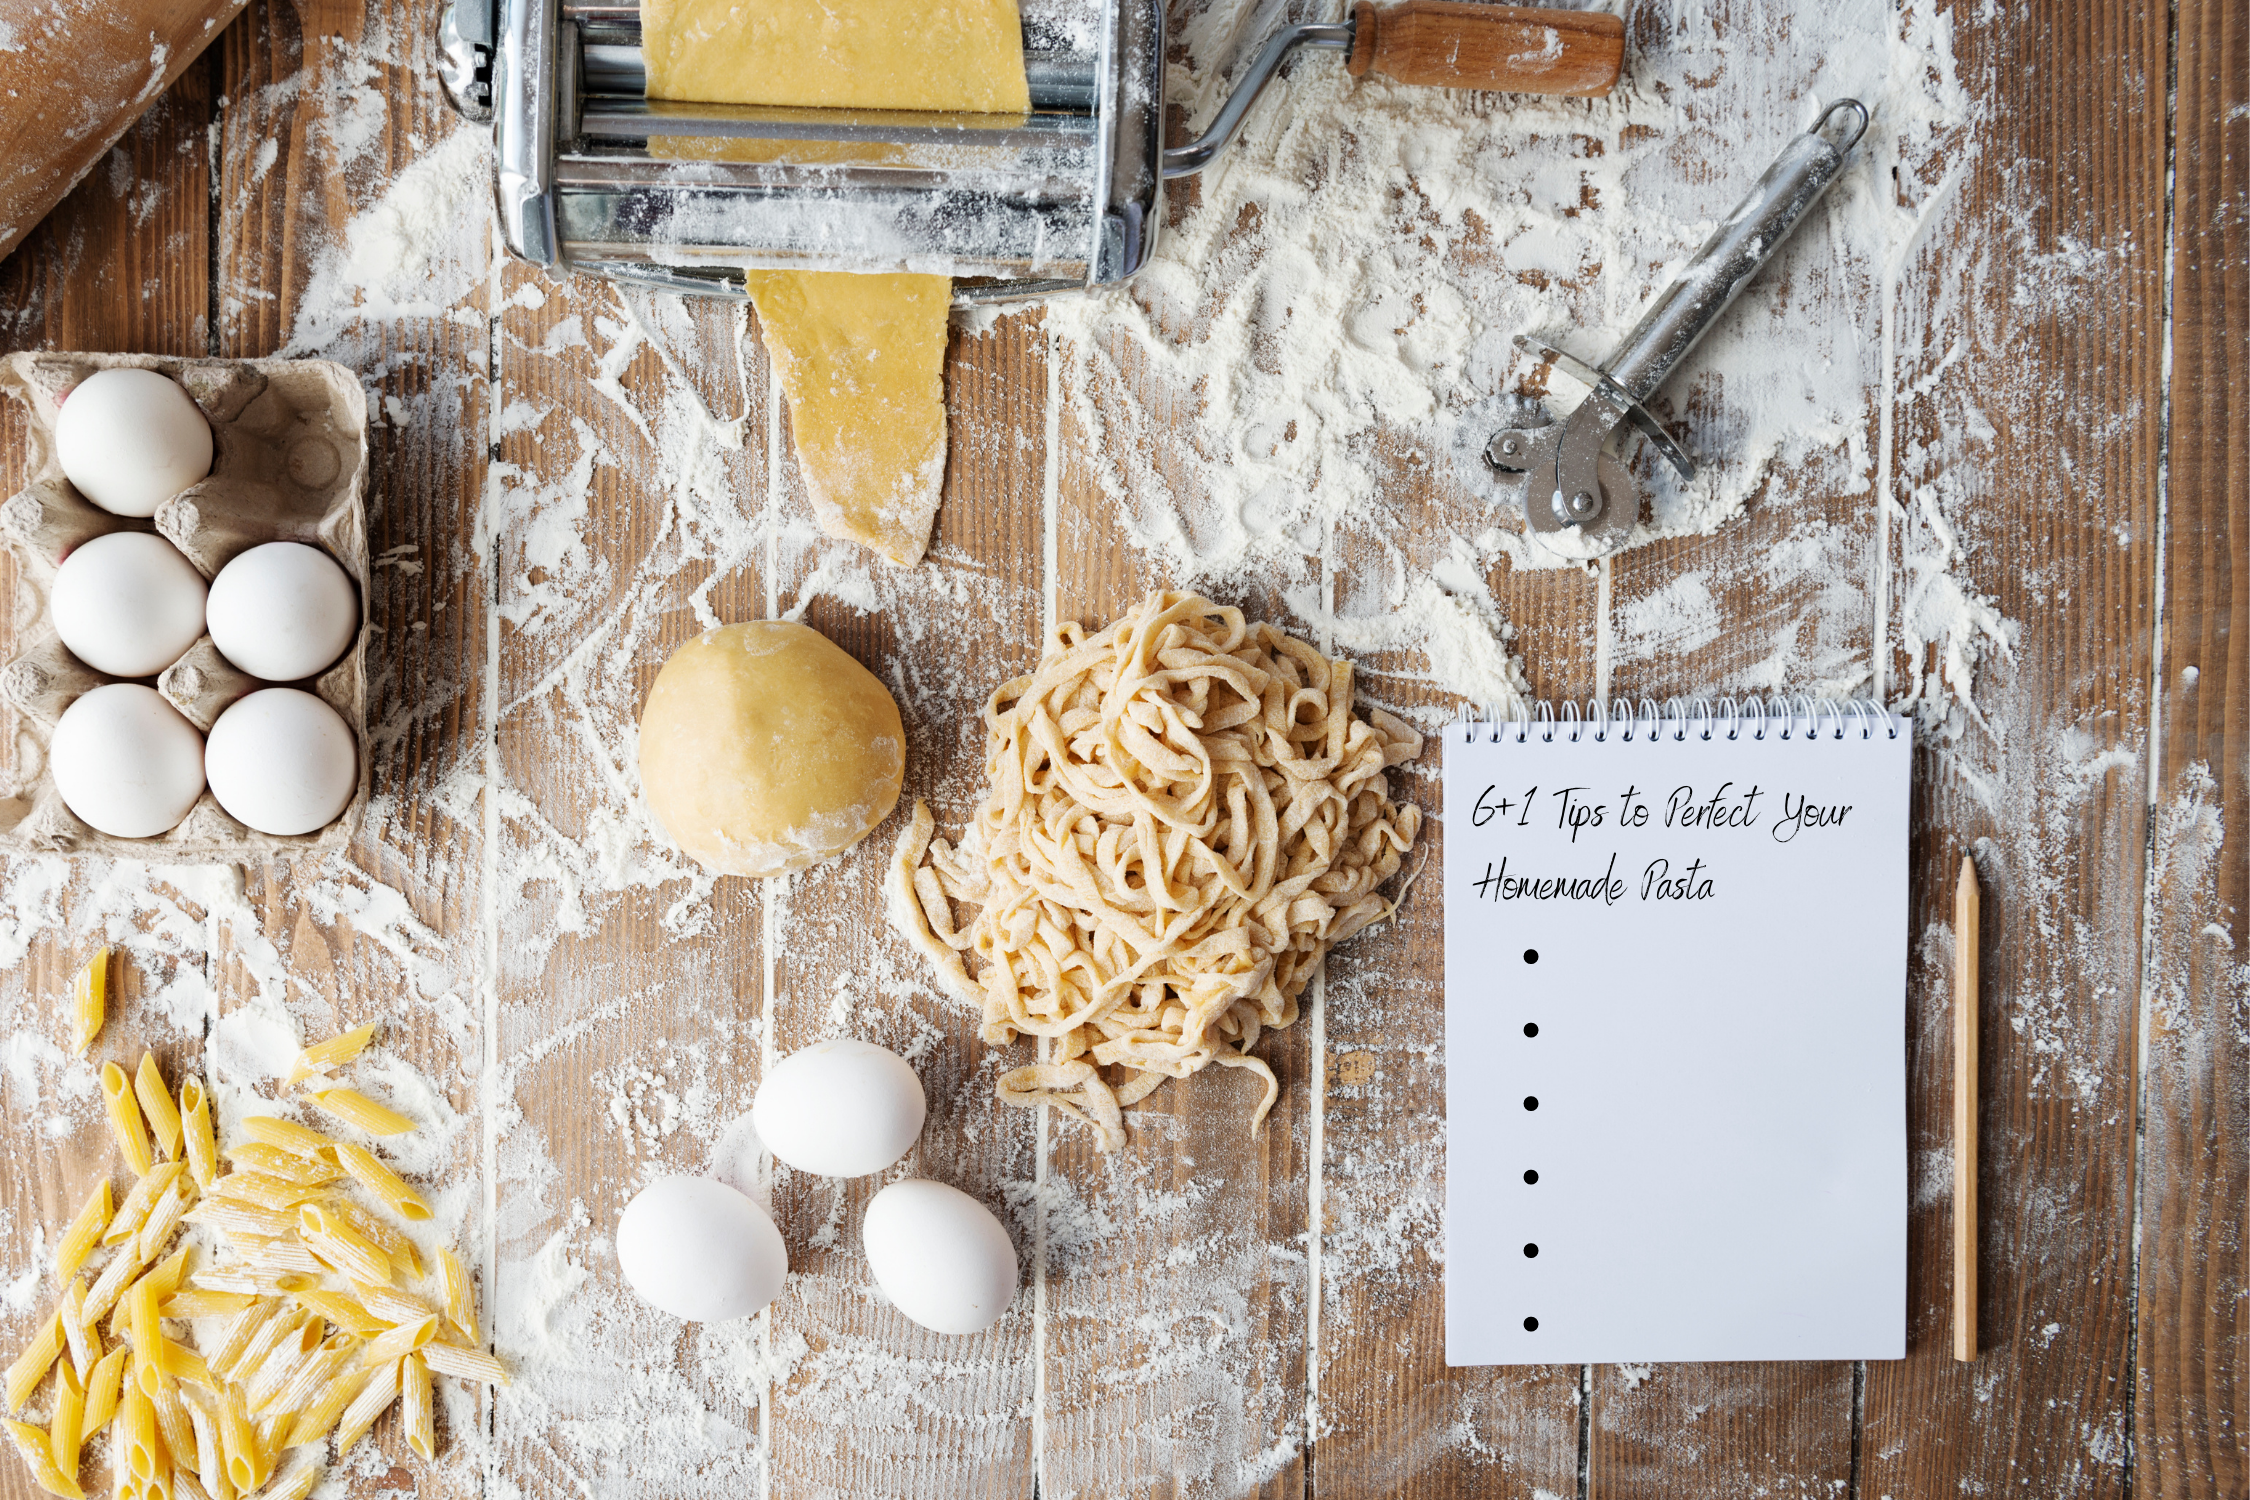 Mastering the Art of Pasta Making: 6+1 Tips to Perfect Your Homemade Pasta